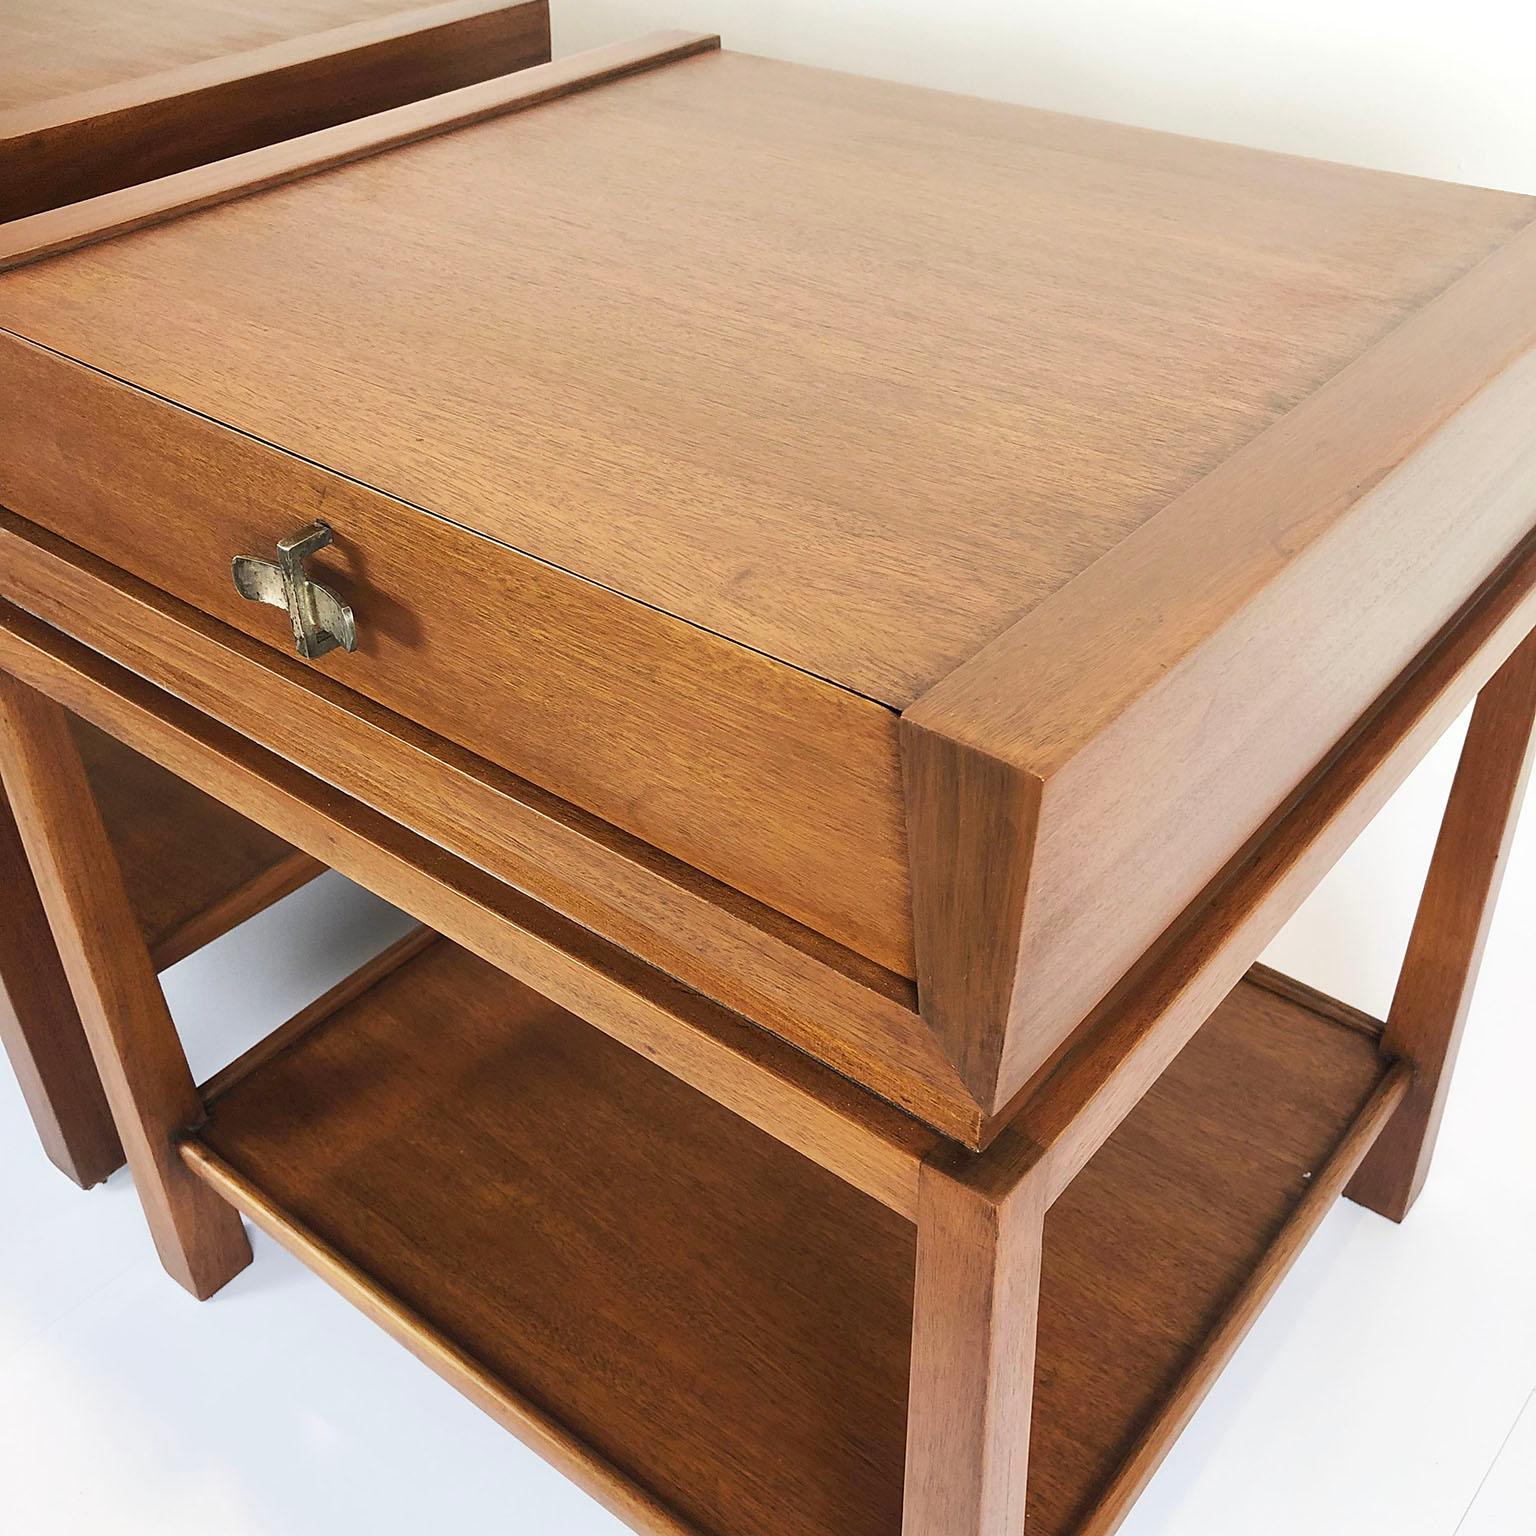 Rare Edmond Spence nightstands in mahogany with a single drawer with cast bronze pull, circa 1950. Great profile with tapering legs and floating drawer cassette. Model 53.
 